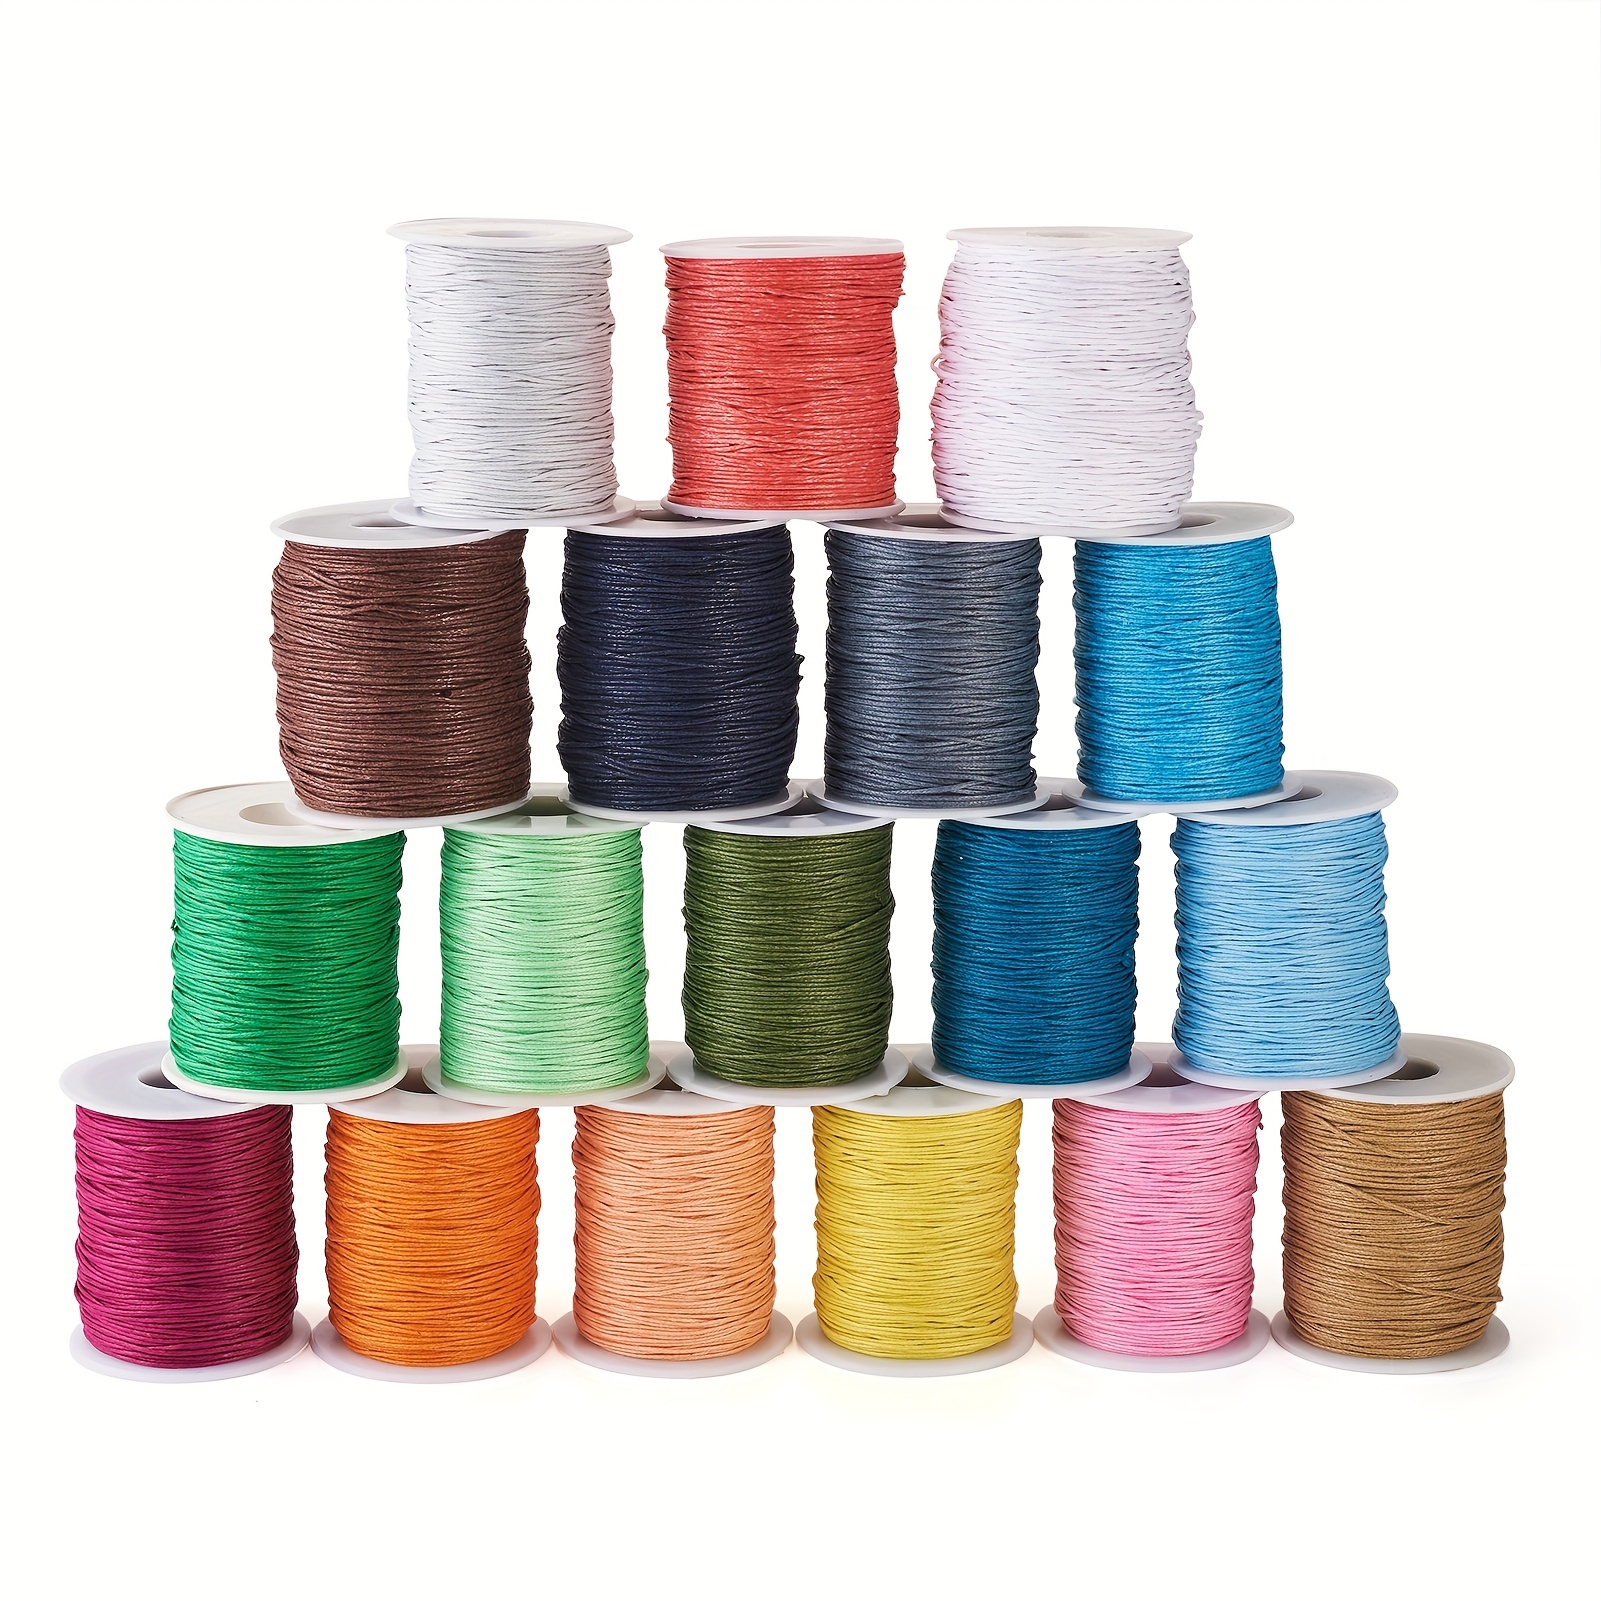 30 COLOUR PACK 1 Mm Waxed Cotton Cord, Macrame Cord, Waxed Cord 